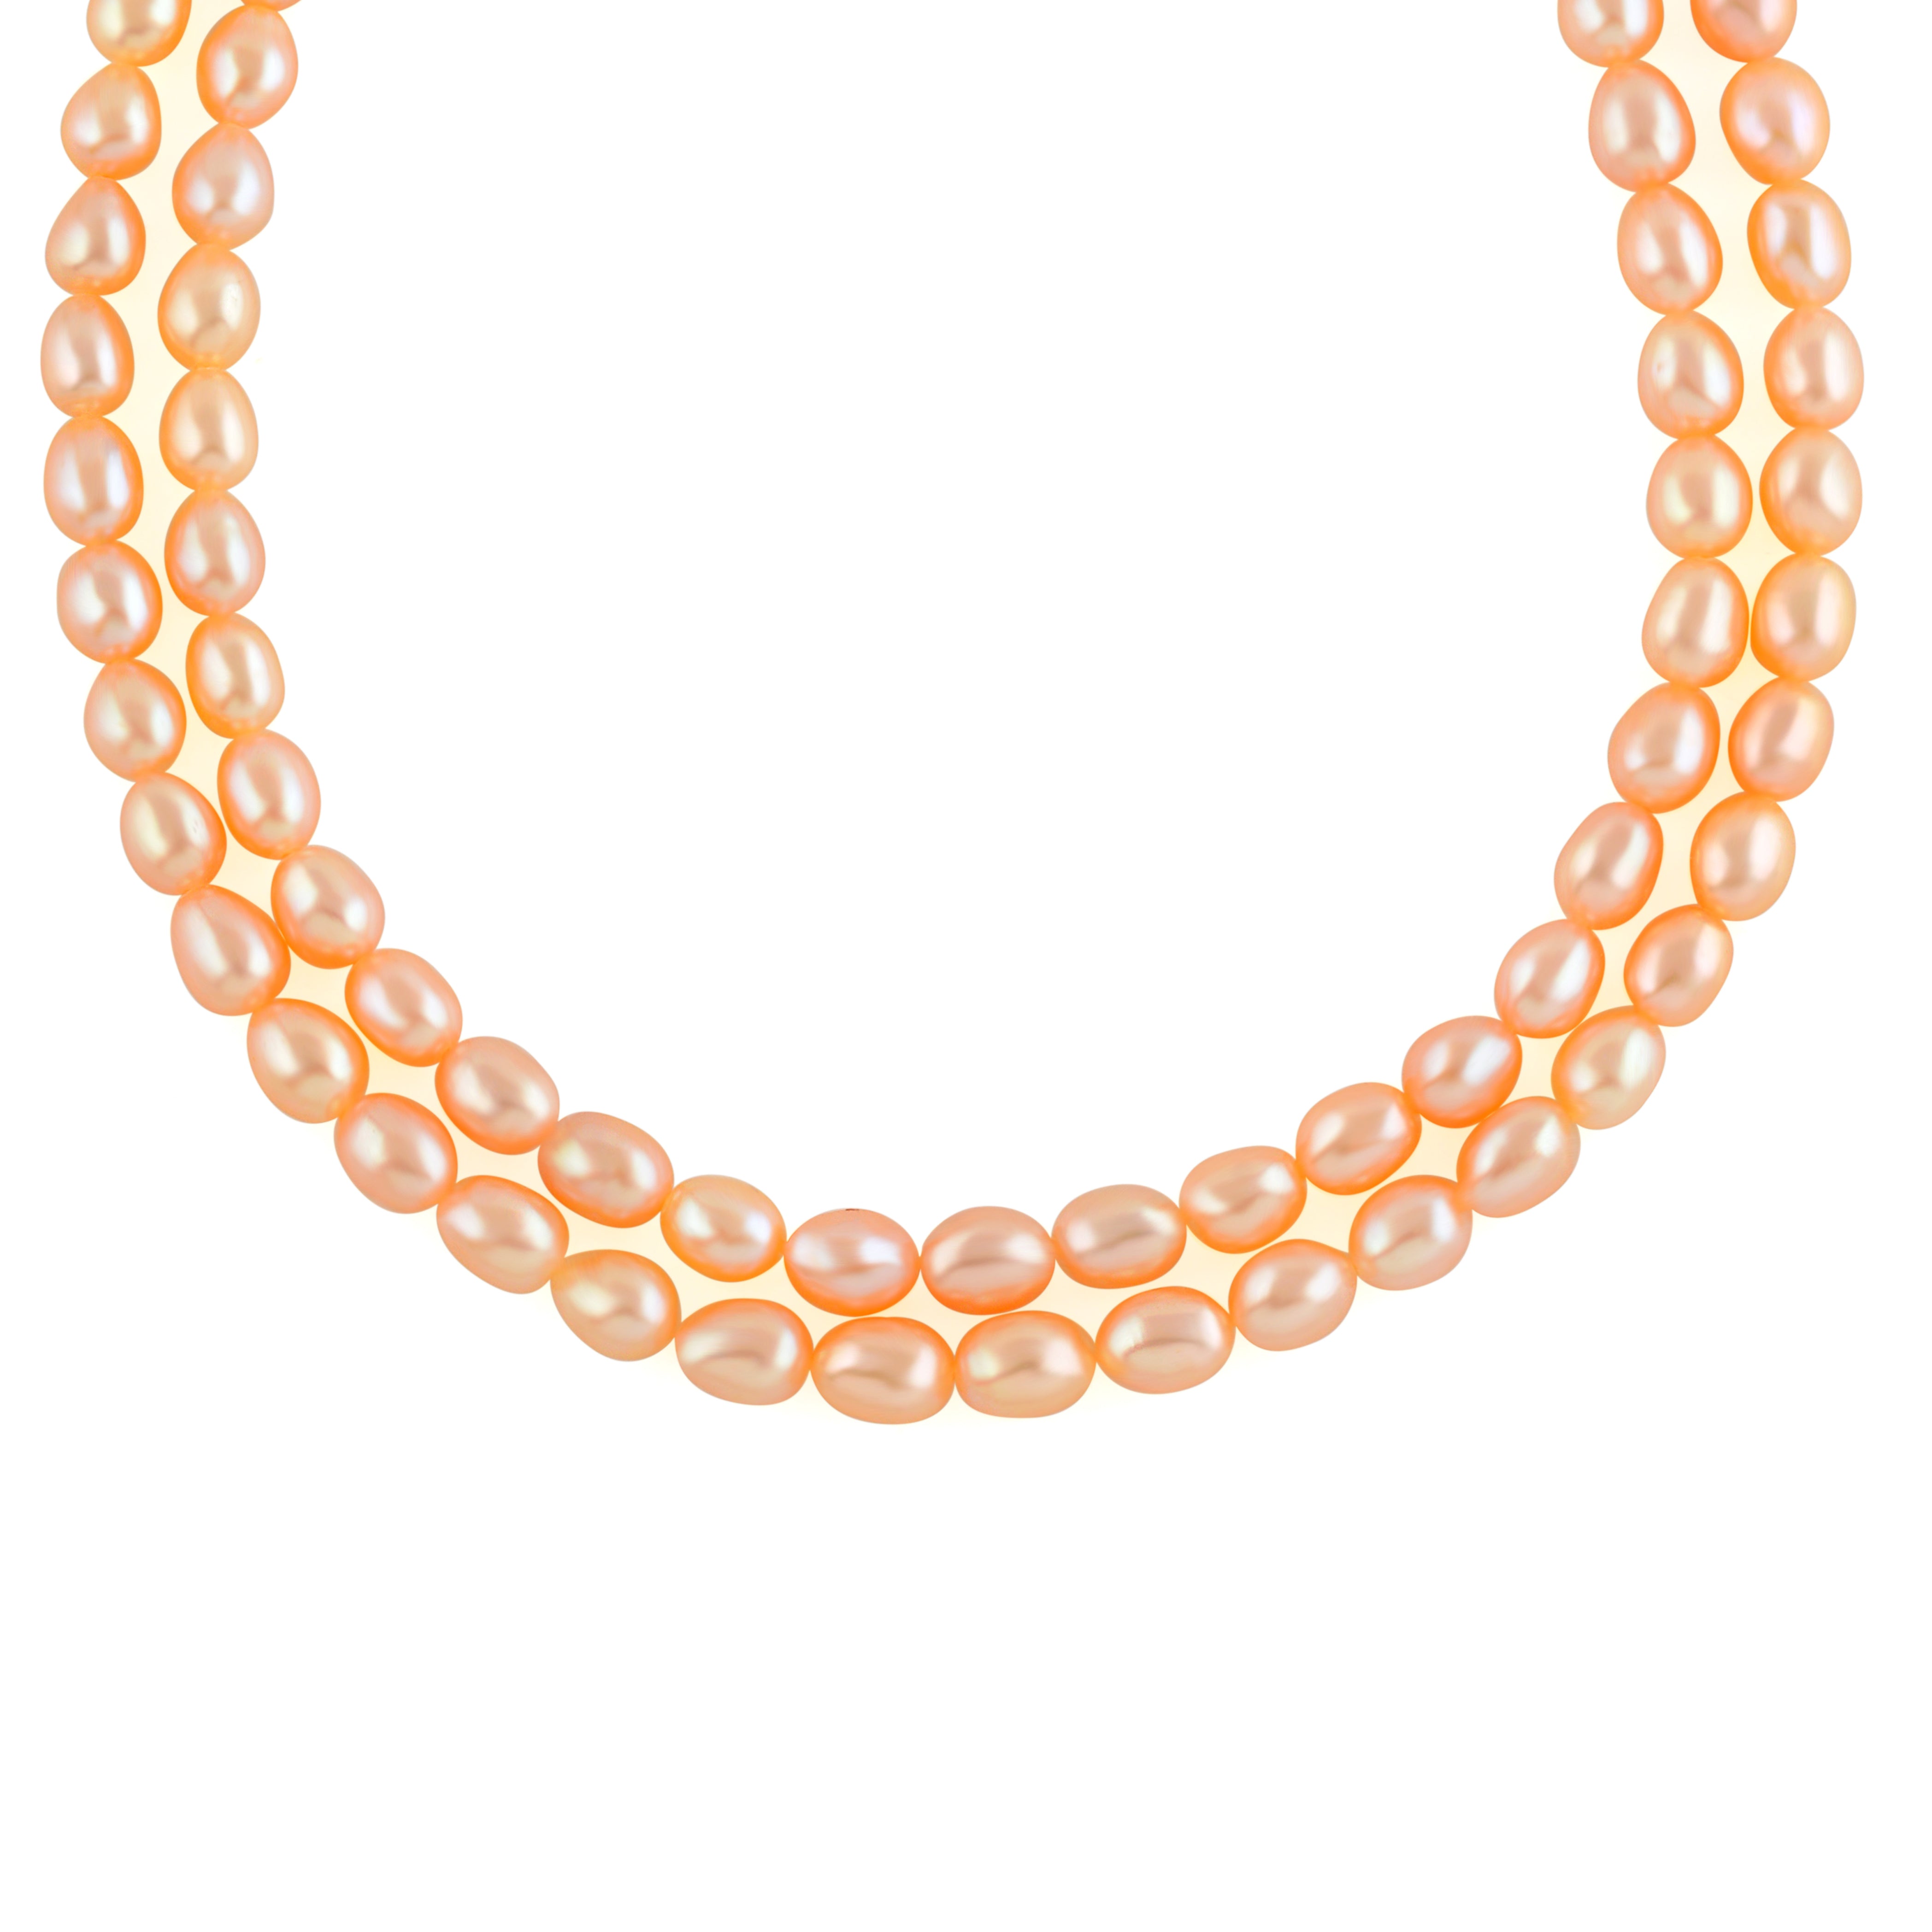 Double-strand pearl necklace in peach color - Krishna Jewellers Pearls and Gems